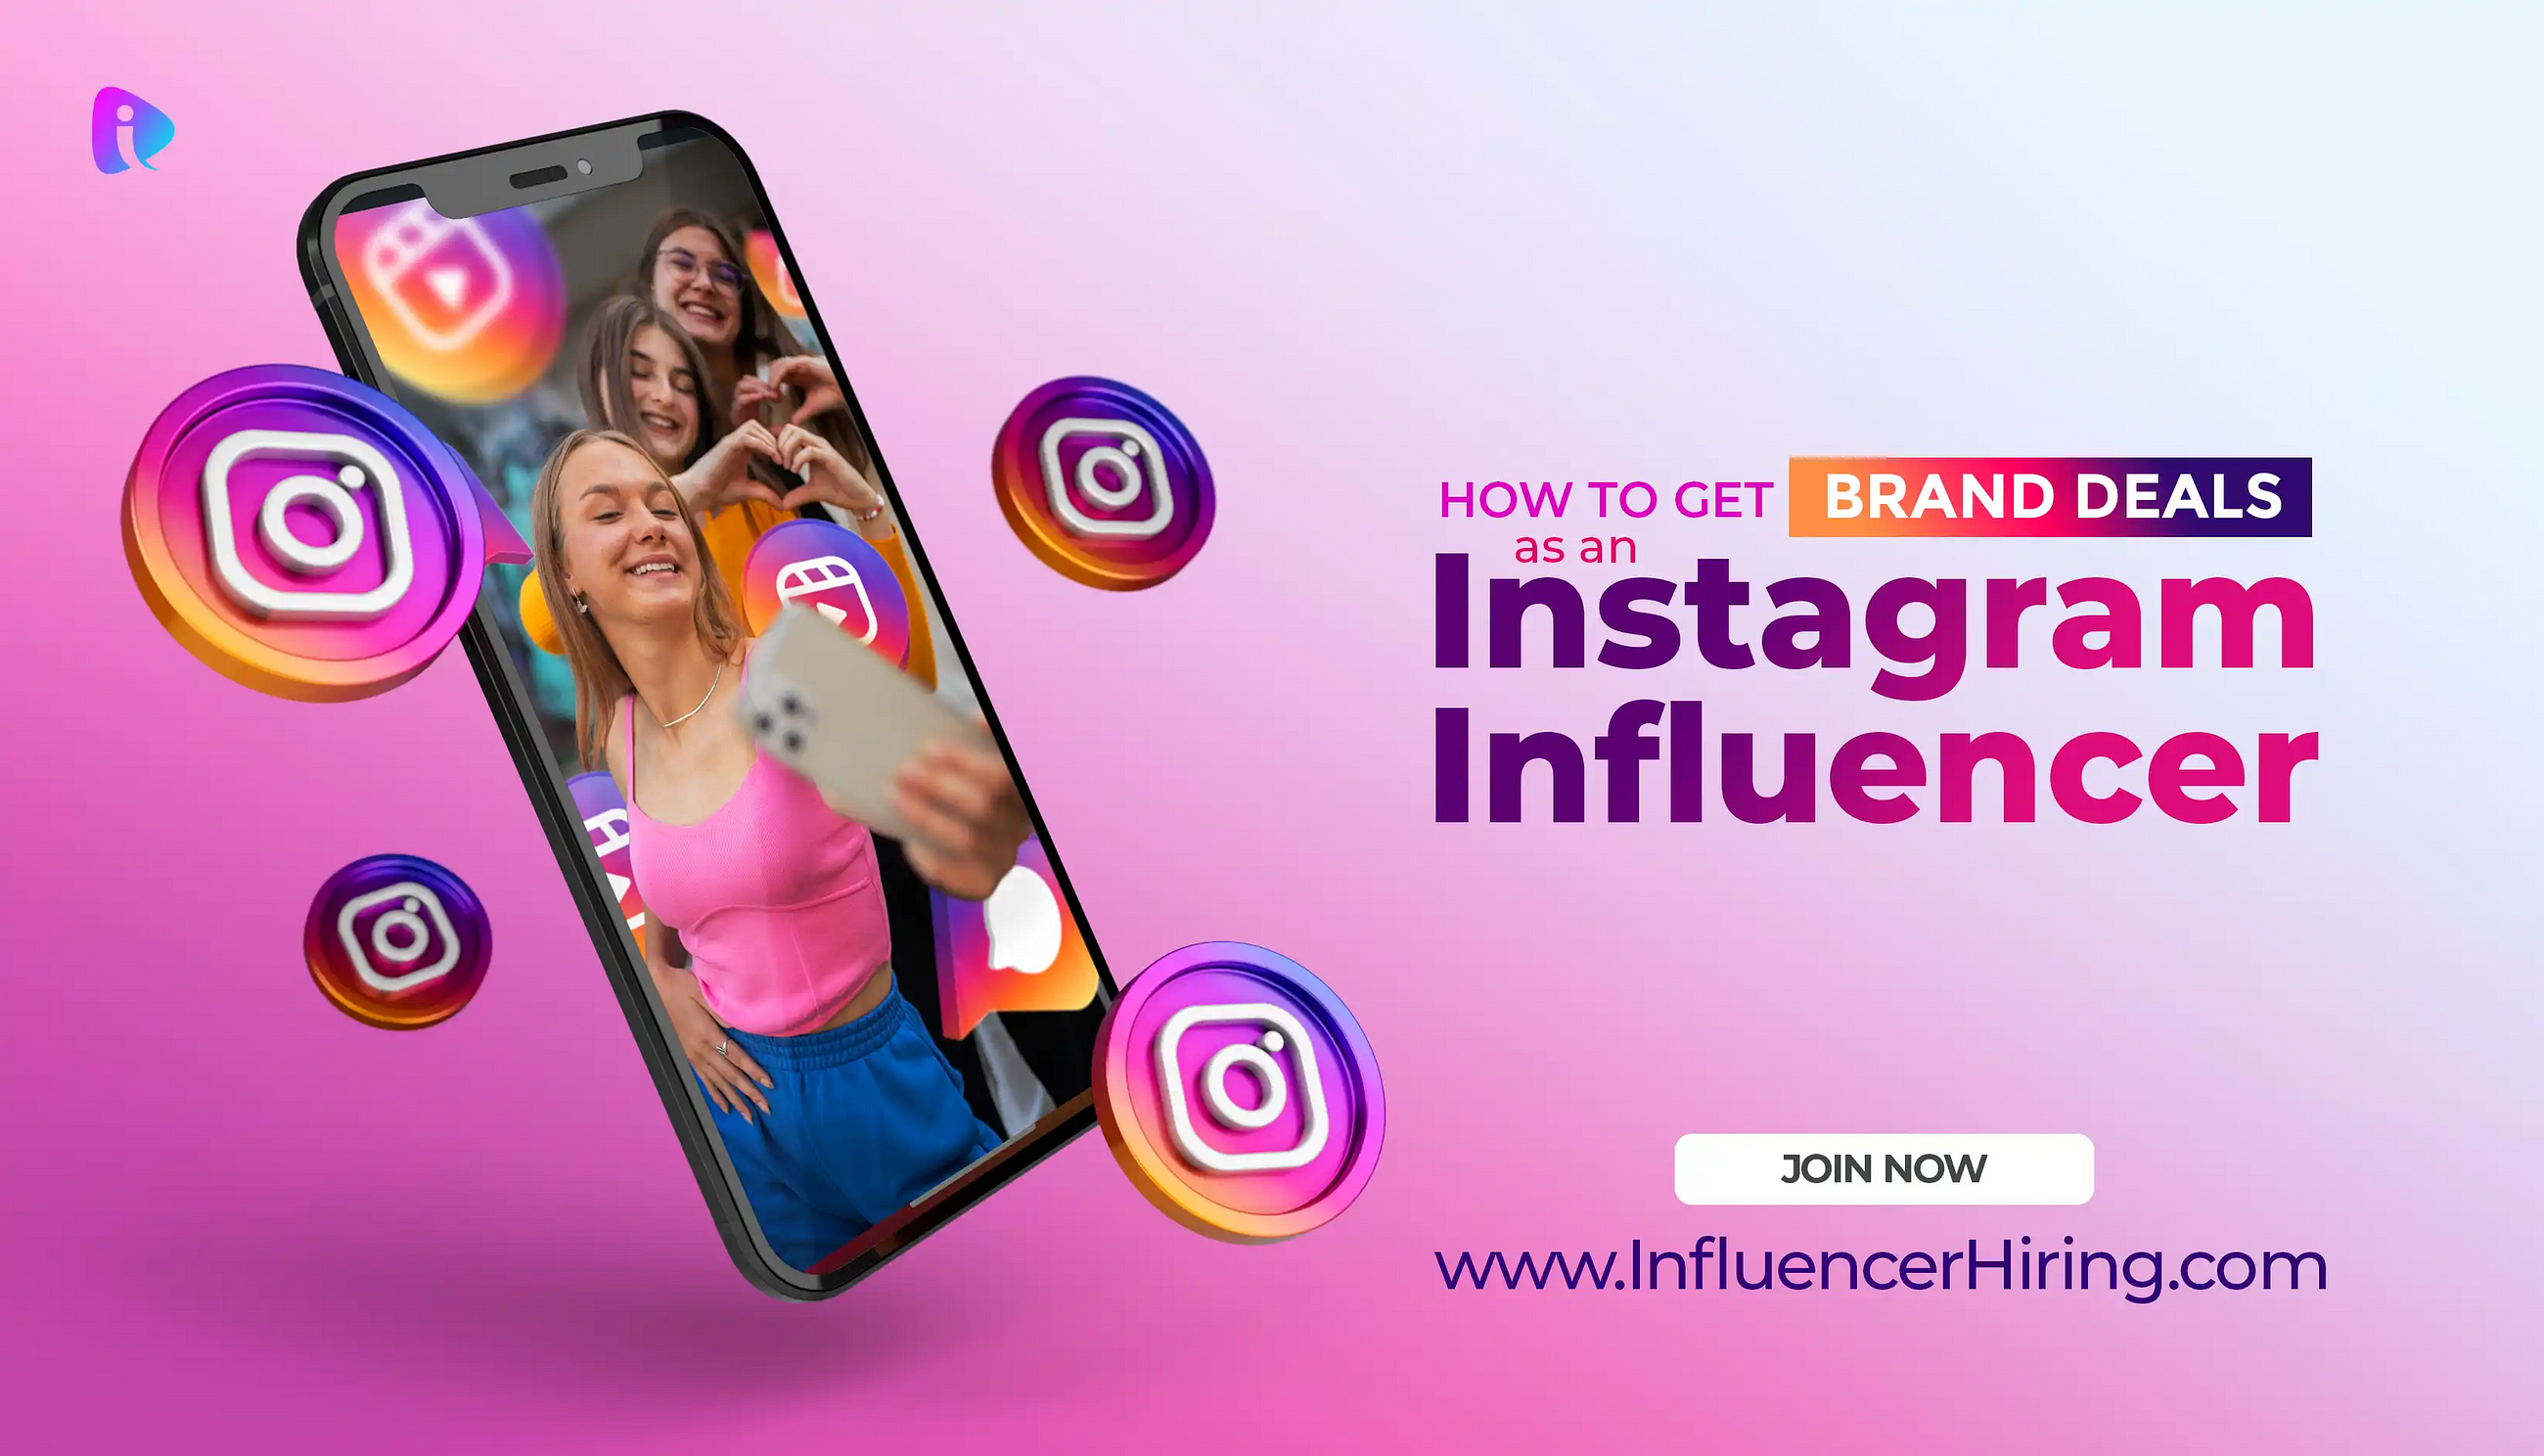 A Guide to Finding Brand Deals as an Instagram Influencer